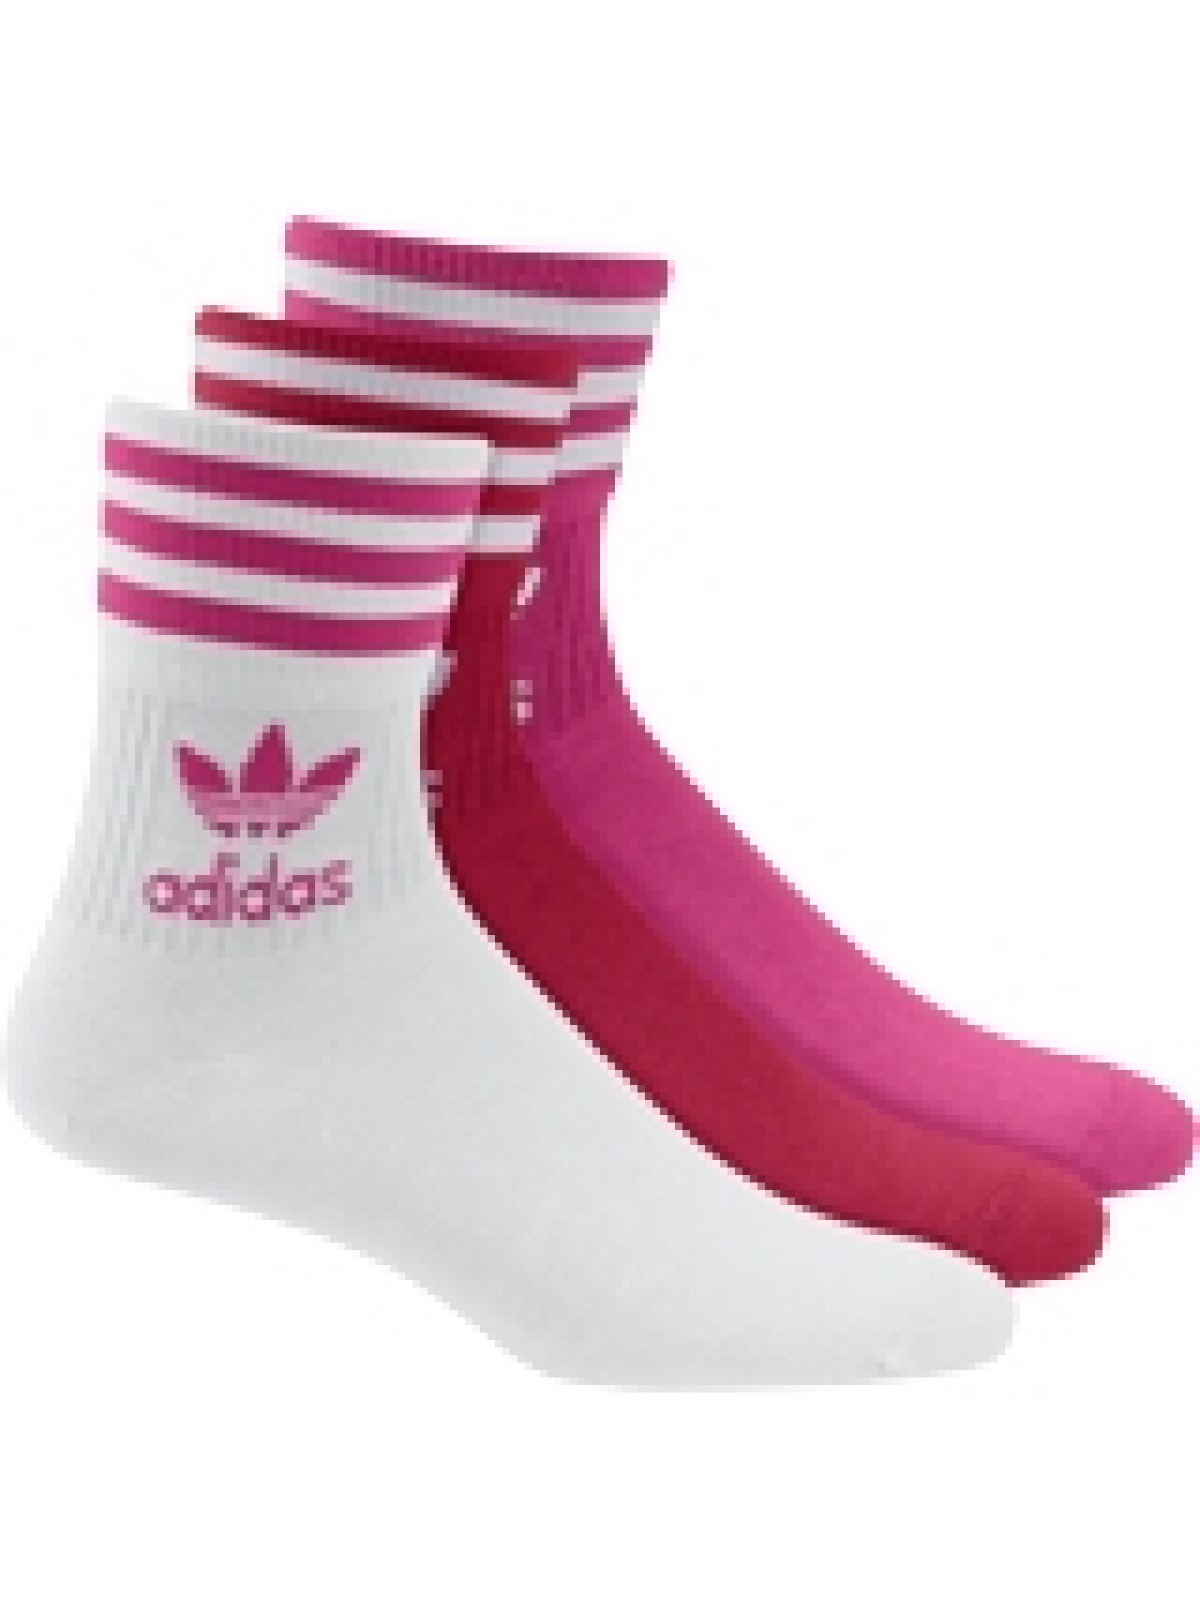 Chaussettes Adidas Homme Blanc